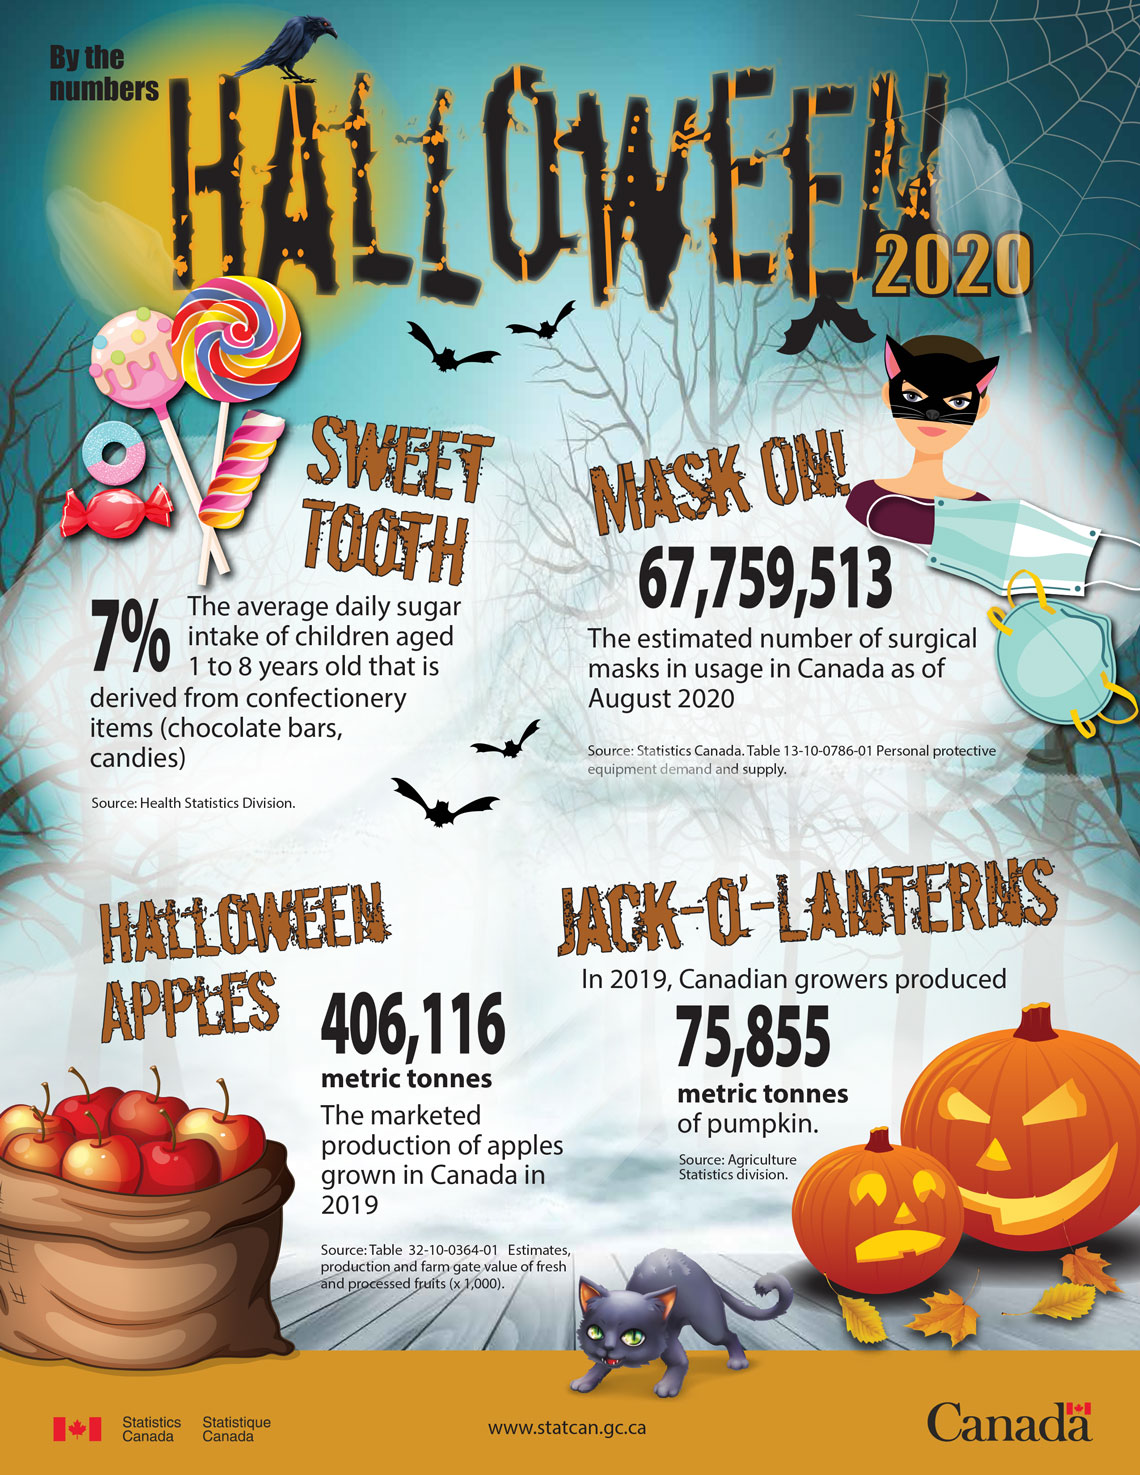 By the numbers - Halloween